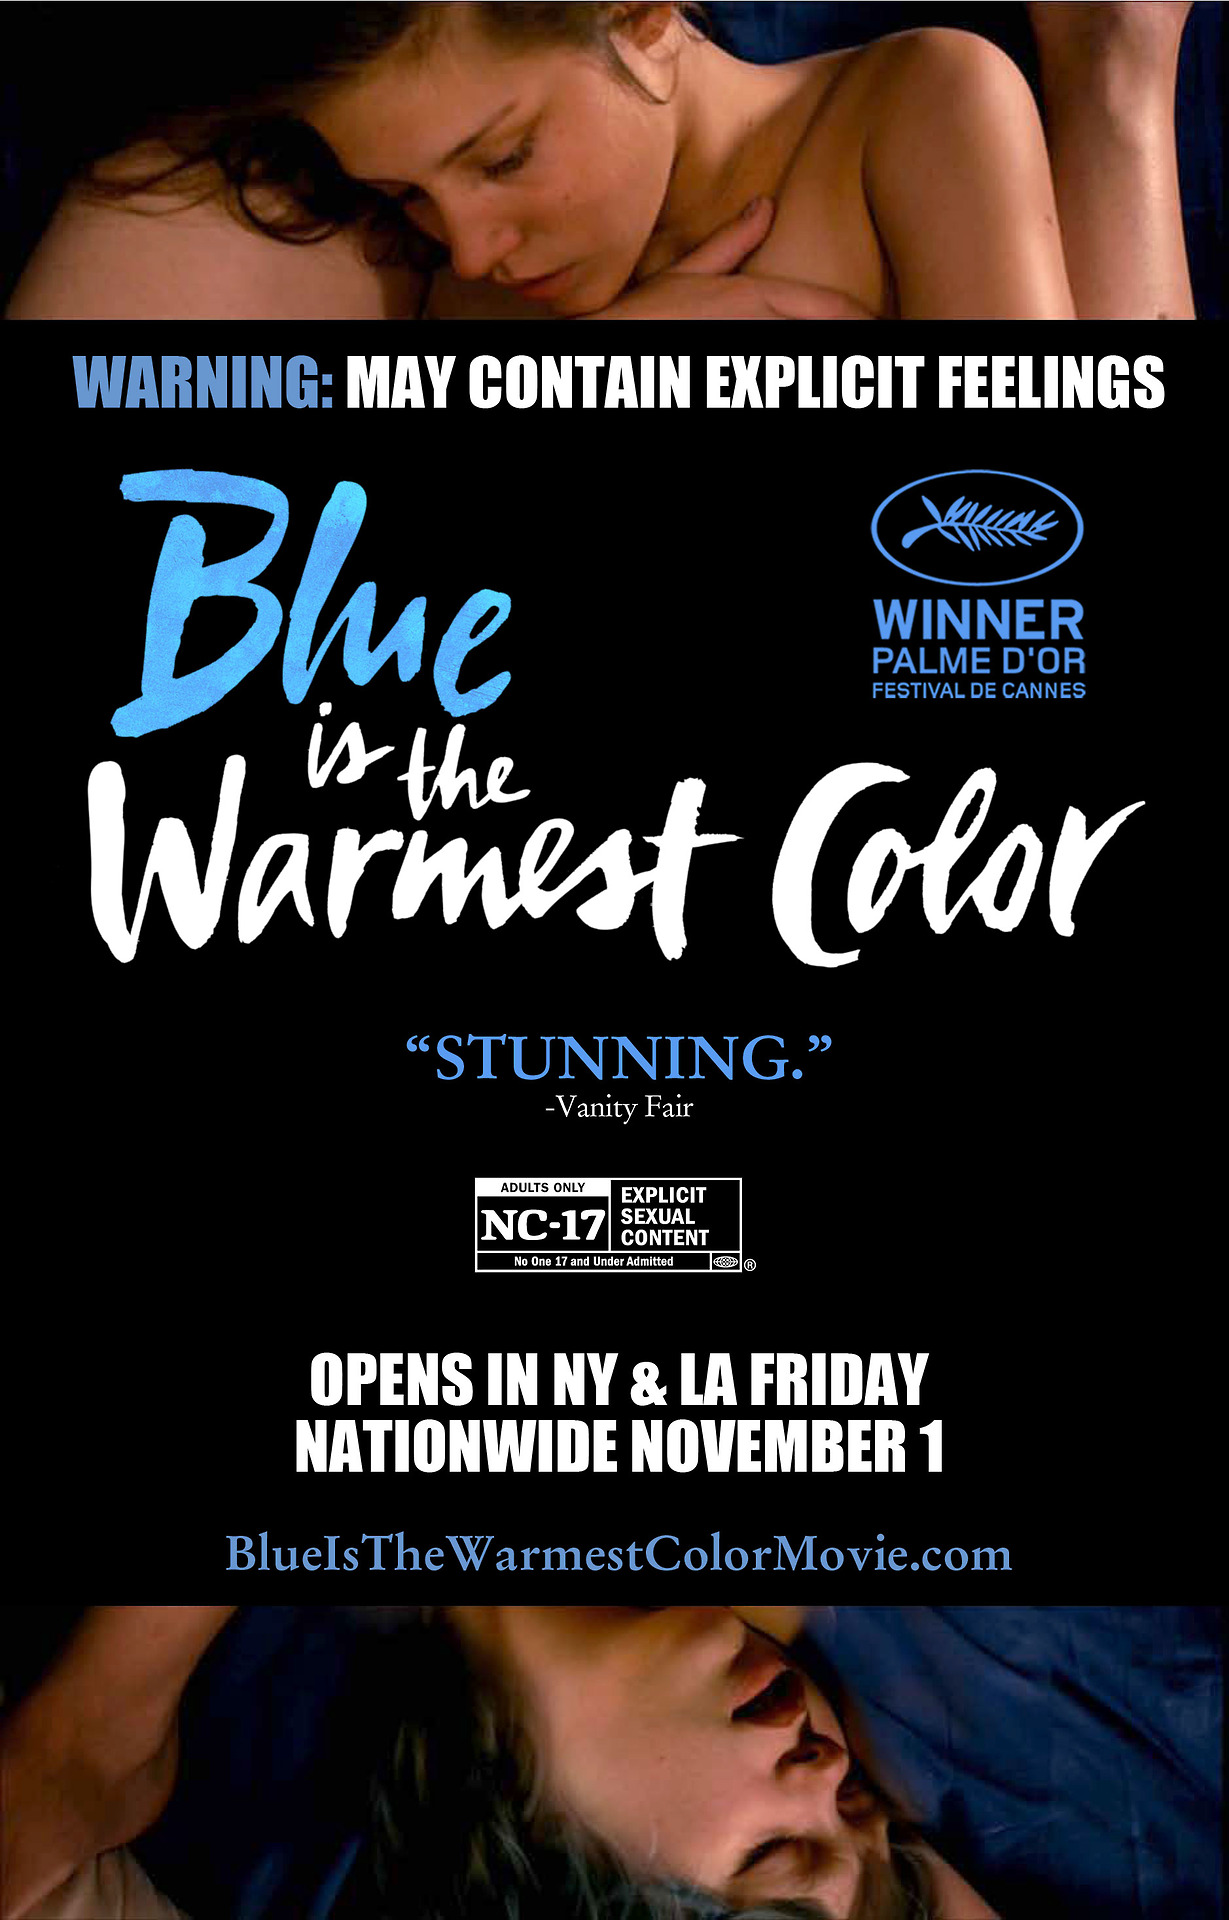 MOVIE POSTERS | Blue is the Warmest Color